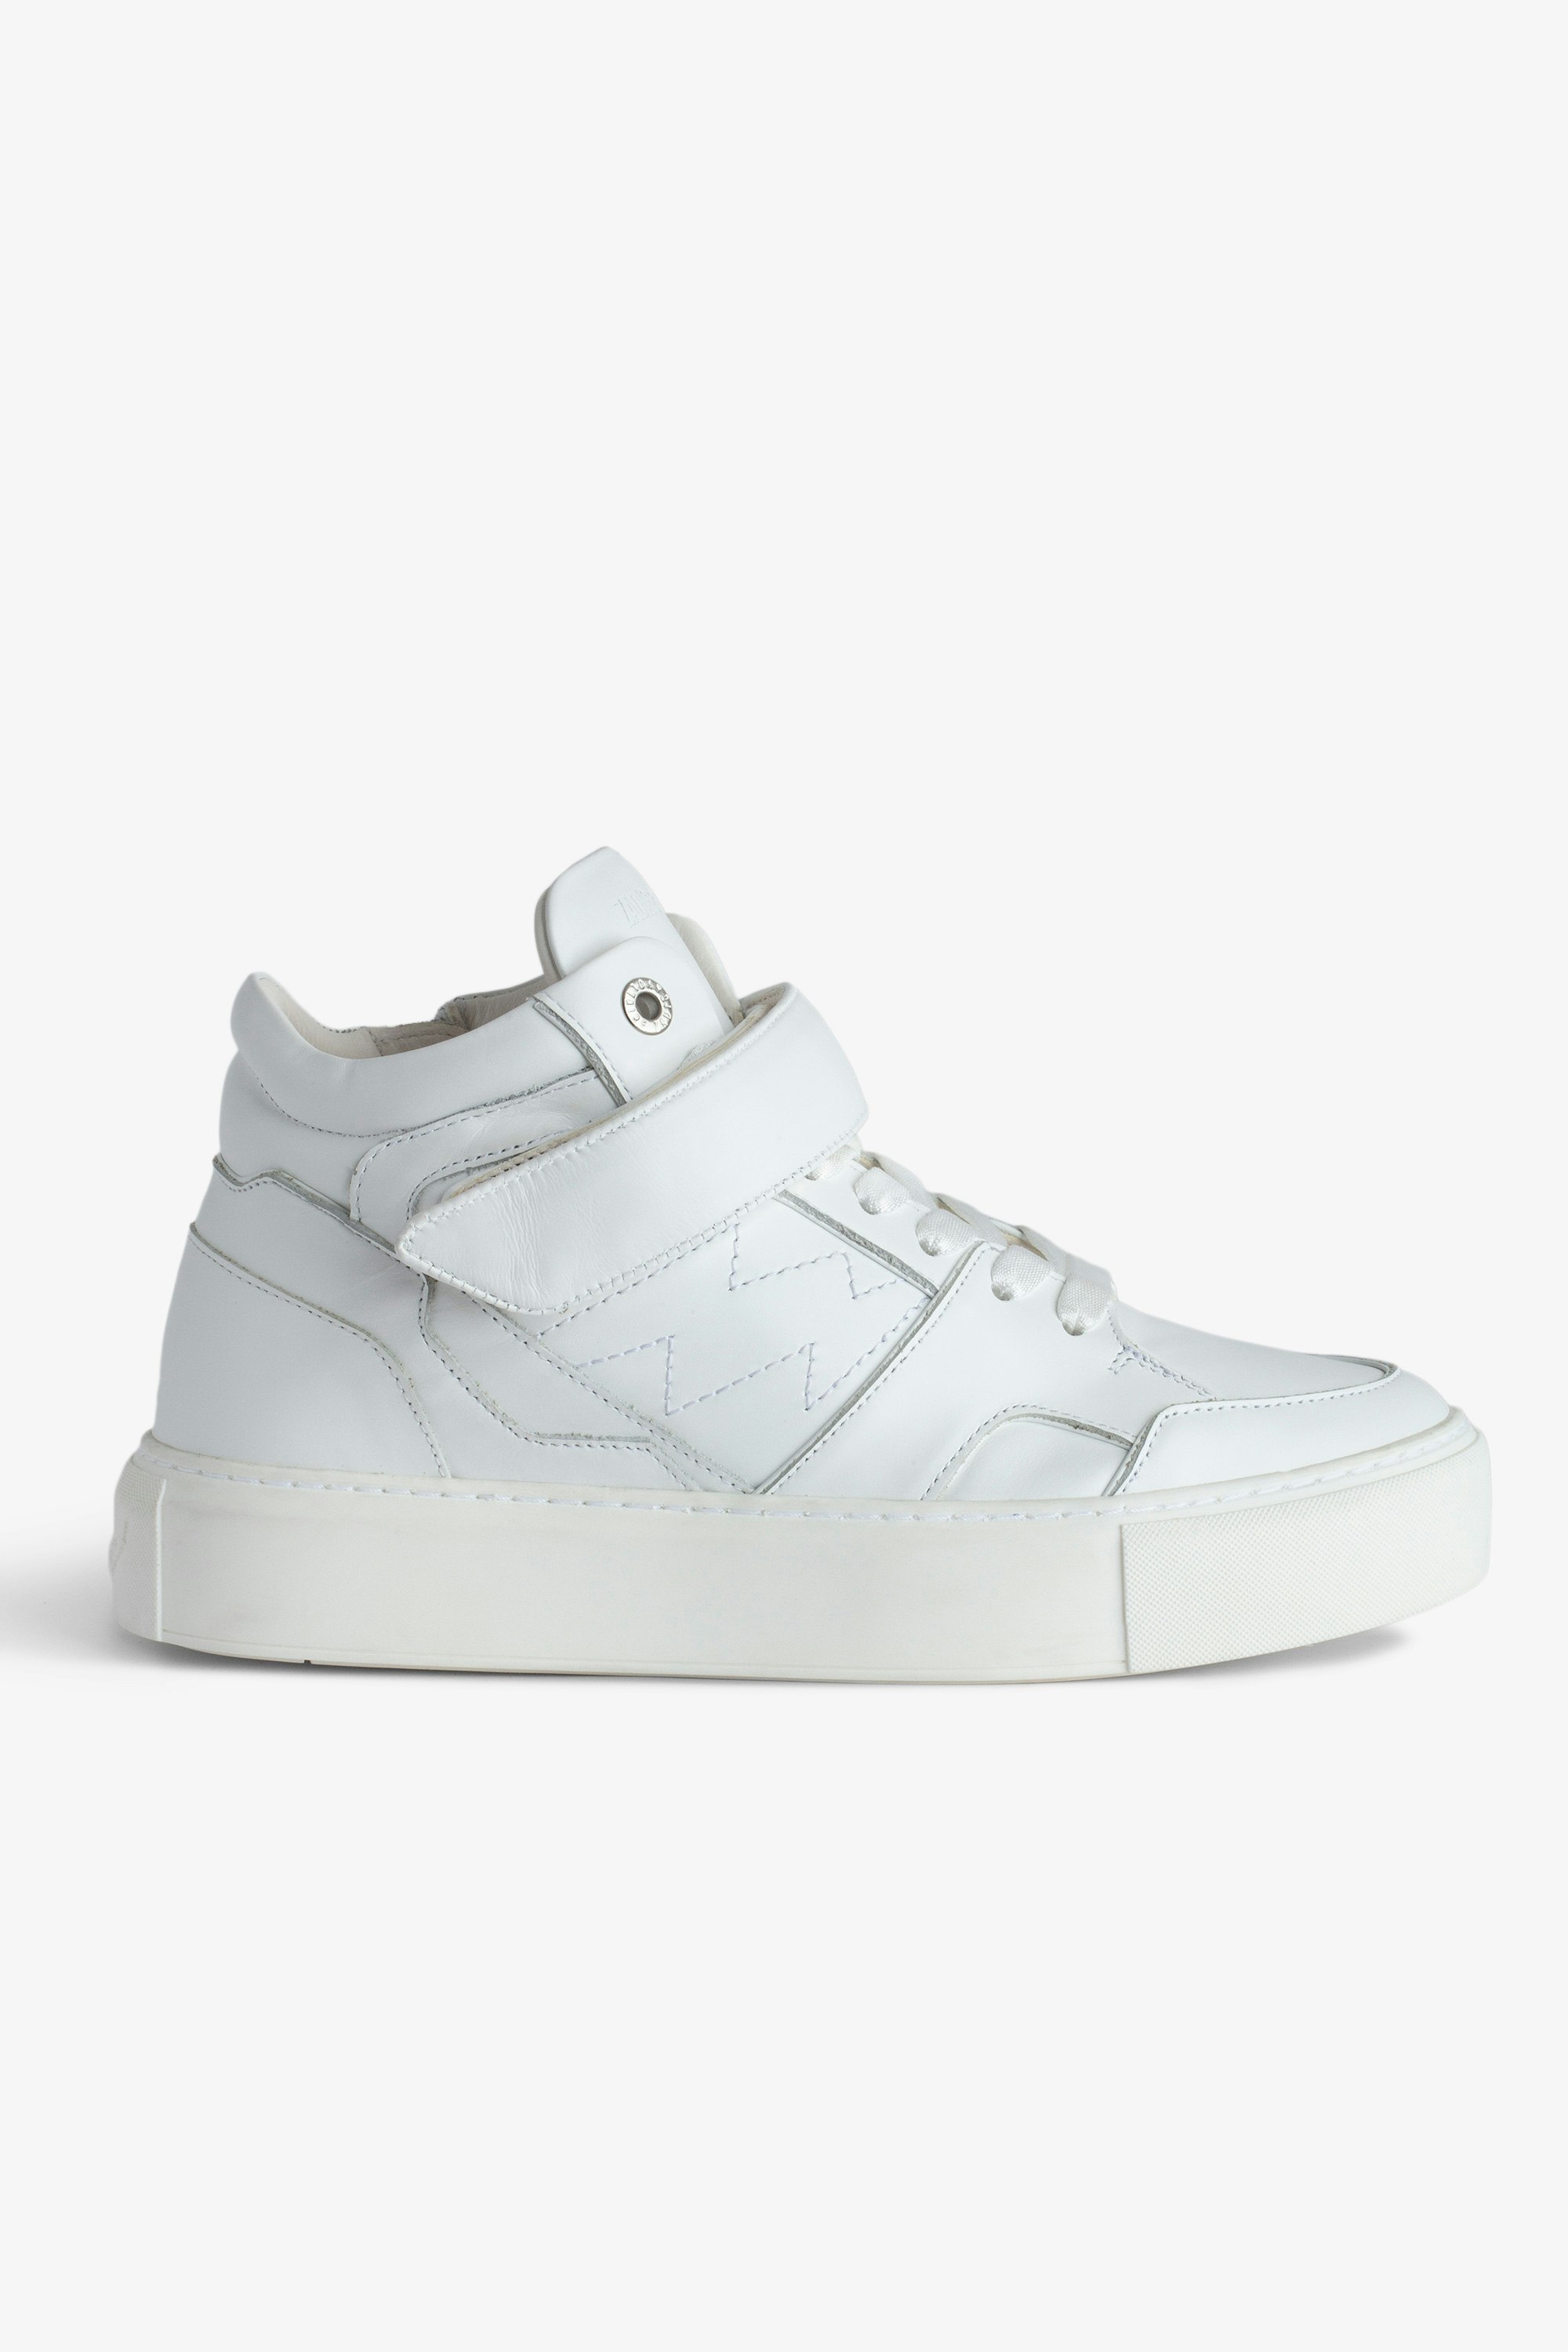 ZV1747 Flash Chunky Mid-Top Trainers - Women’s white smooth leather mid-top trainers with Velcro fastening, lightning bolt panels and chunky sole.